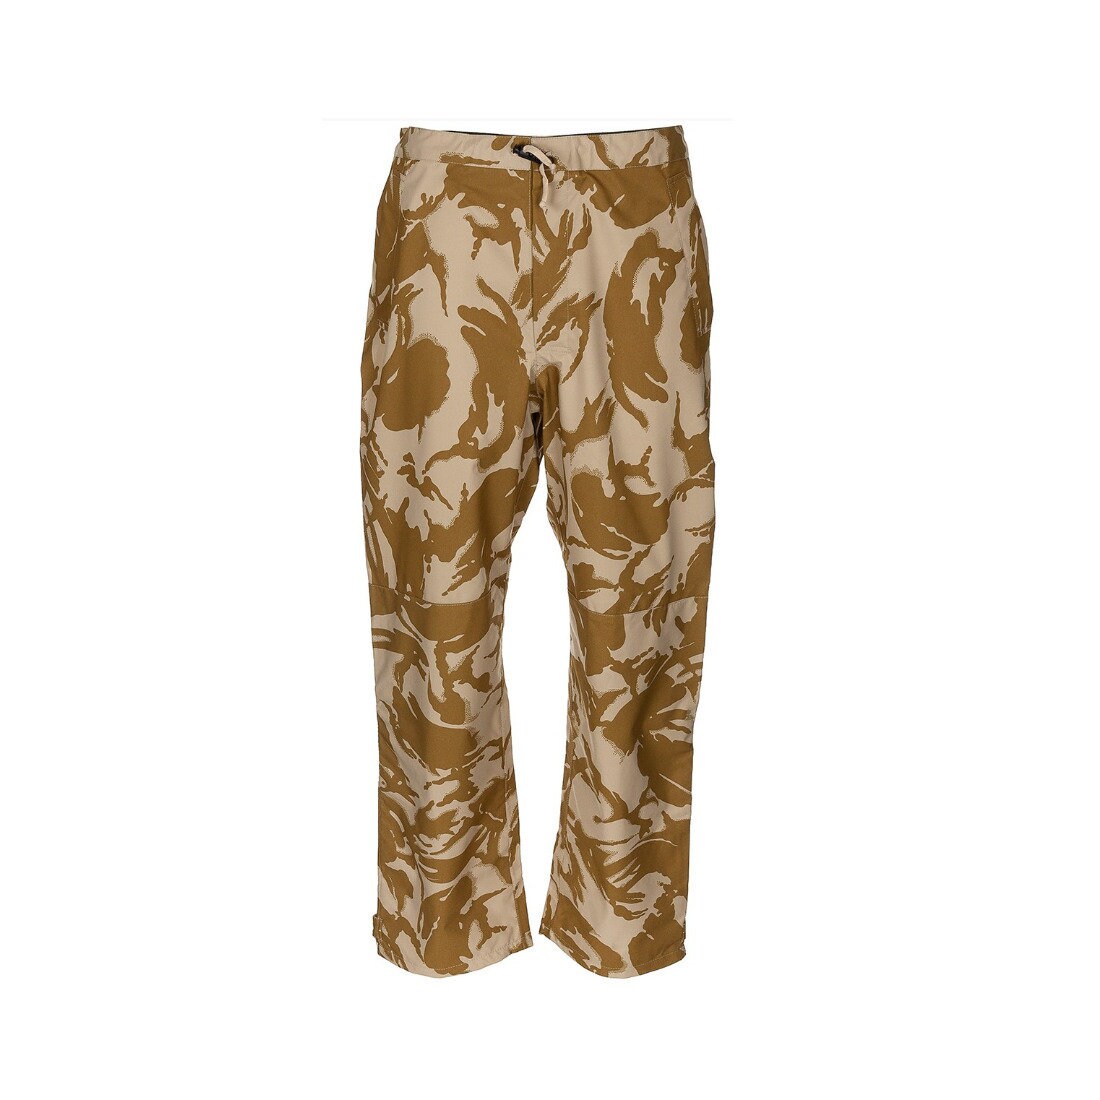 British Military Soldier 95 DPM Temperate Trousers